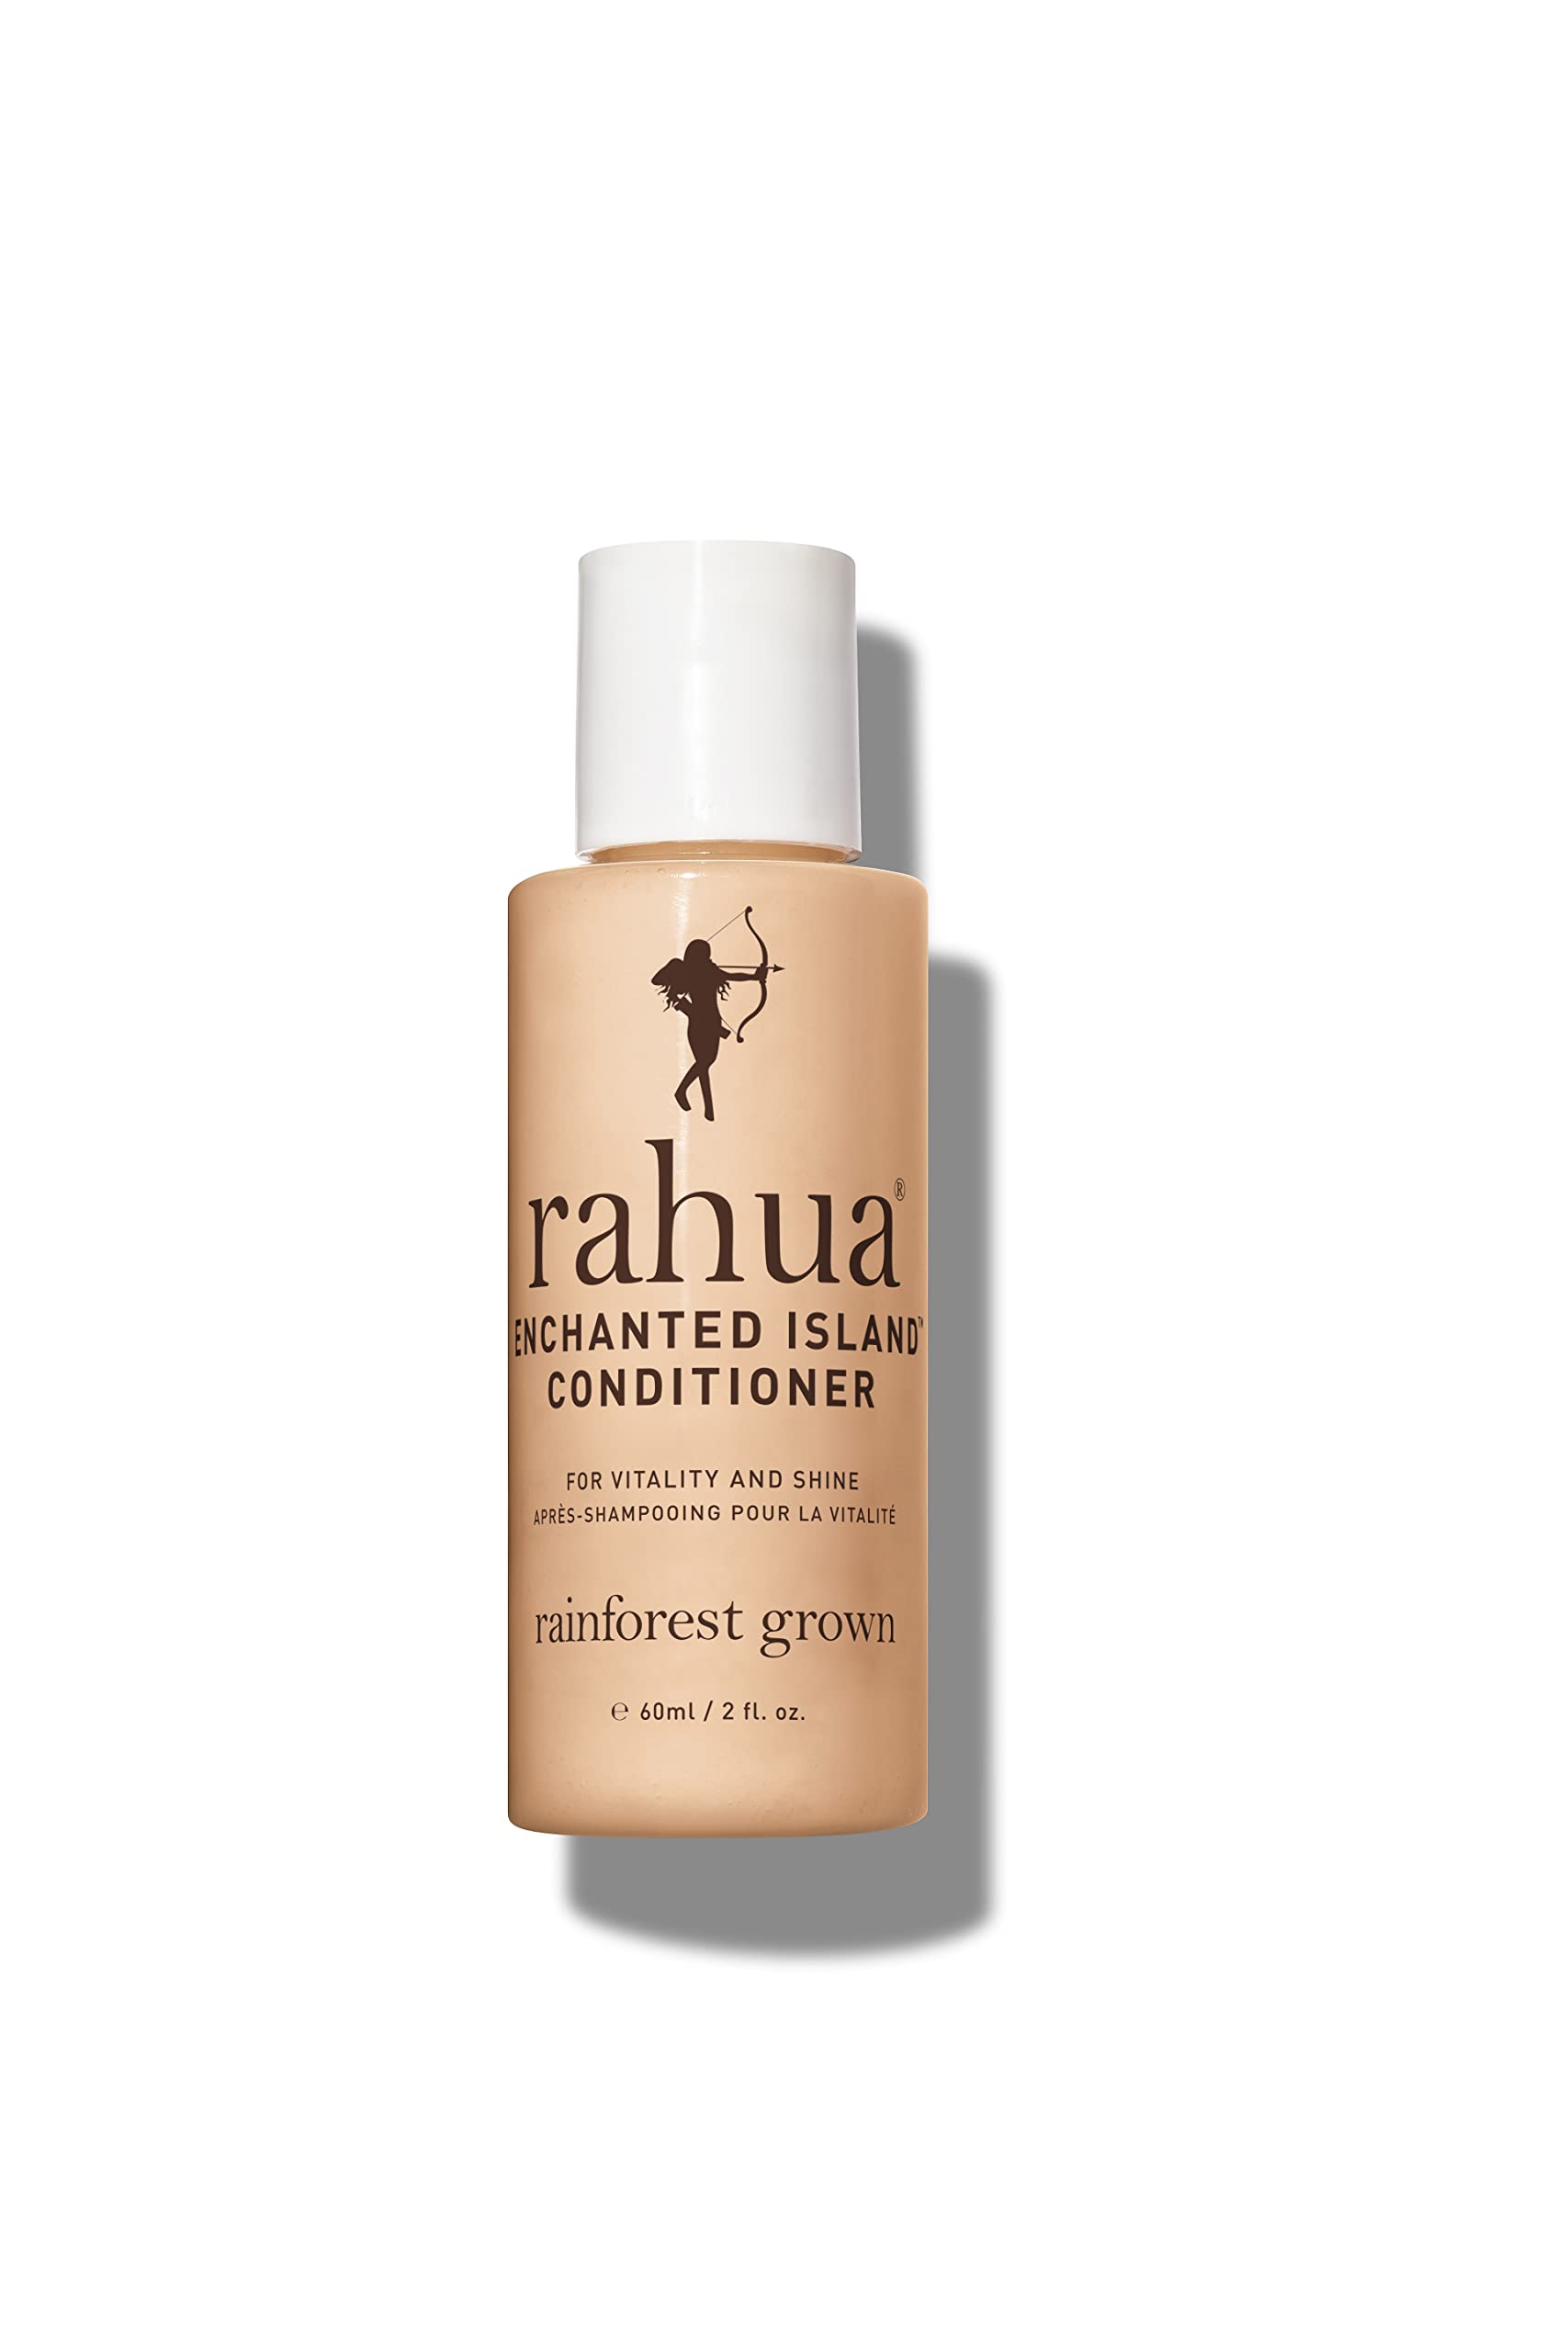 Rahua Enchanted Island Conditioner, 2 Fl Oz, Promotes Strength, Hair Growth and Gives Shine to All Hair Types, Nourishing Hair Conditioner for Men and Women